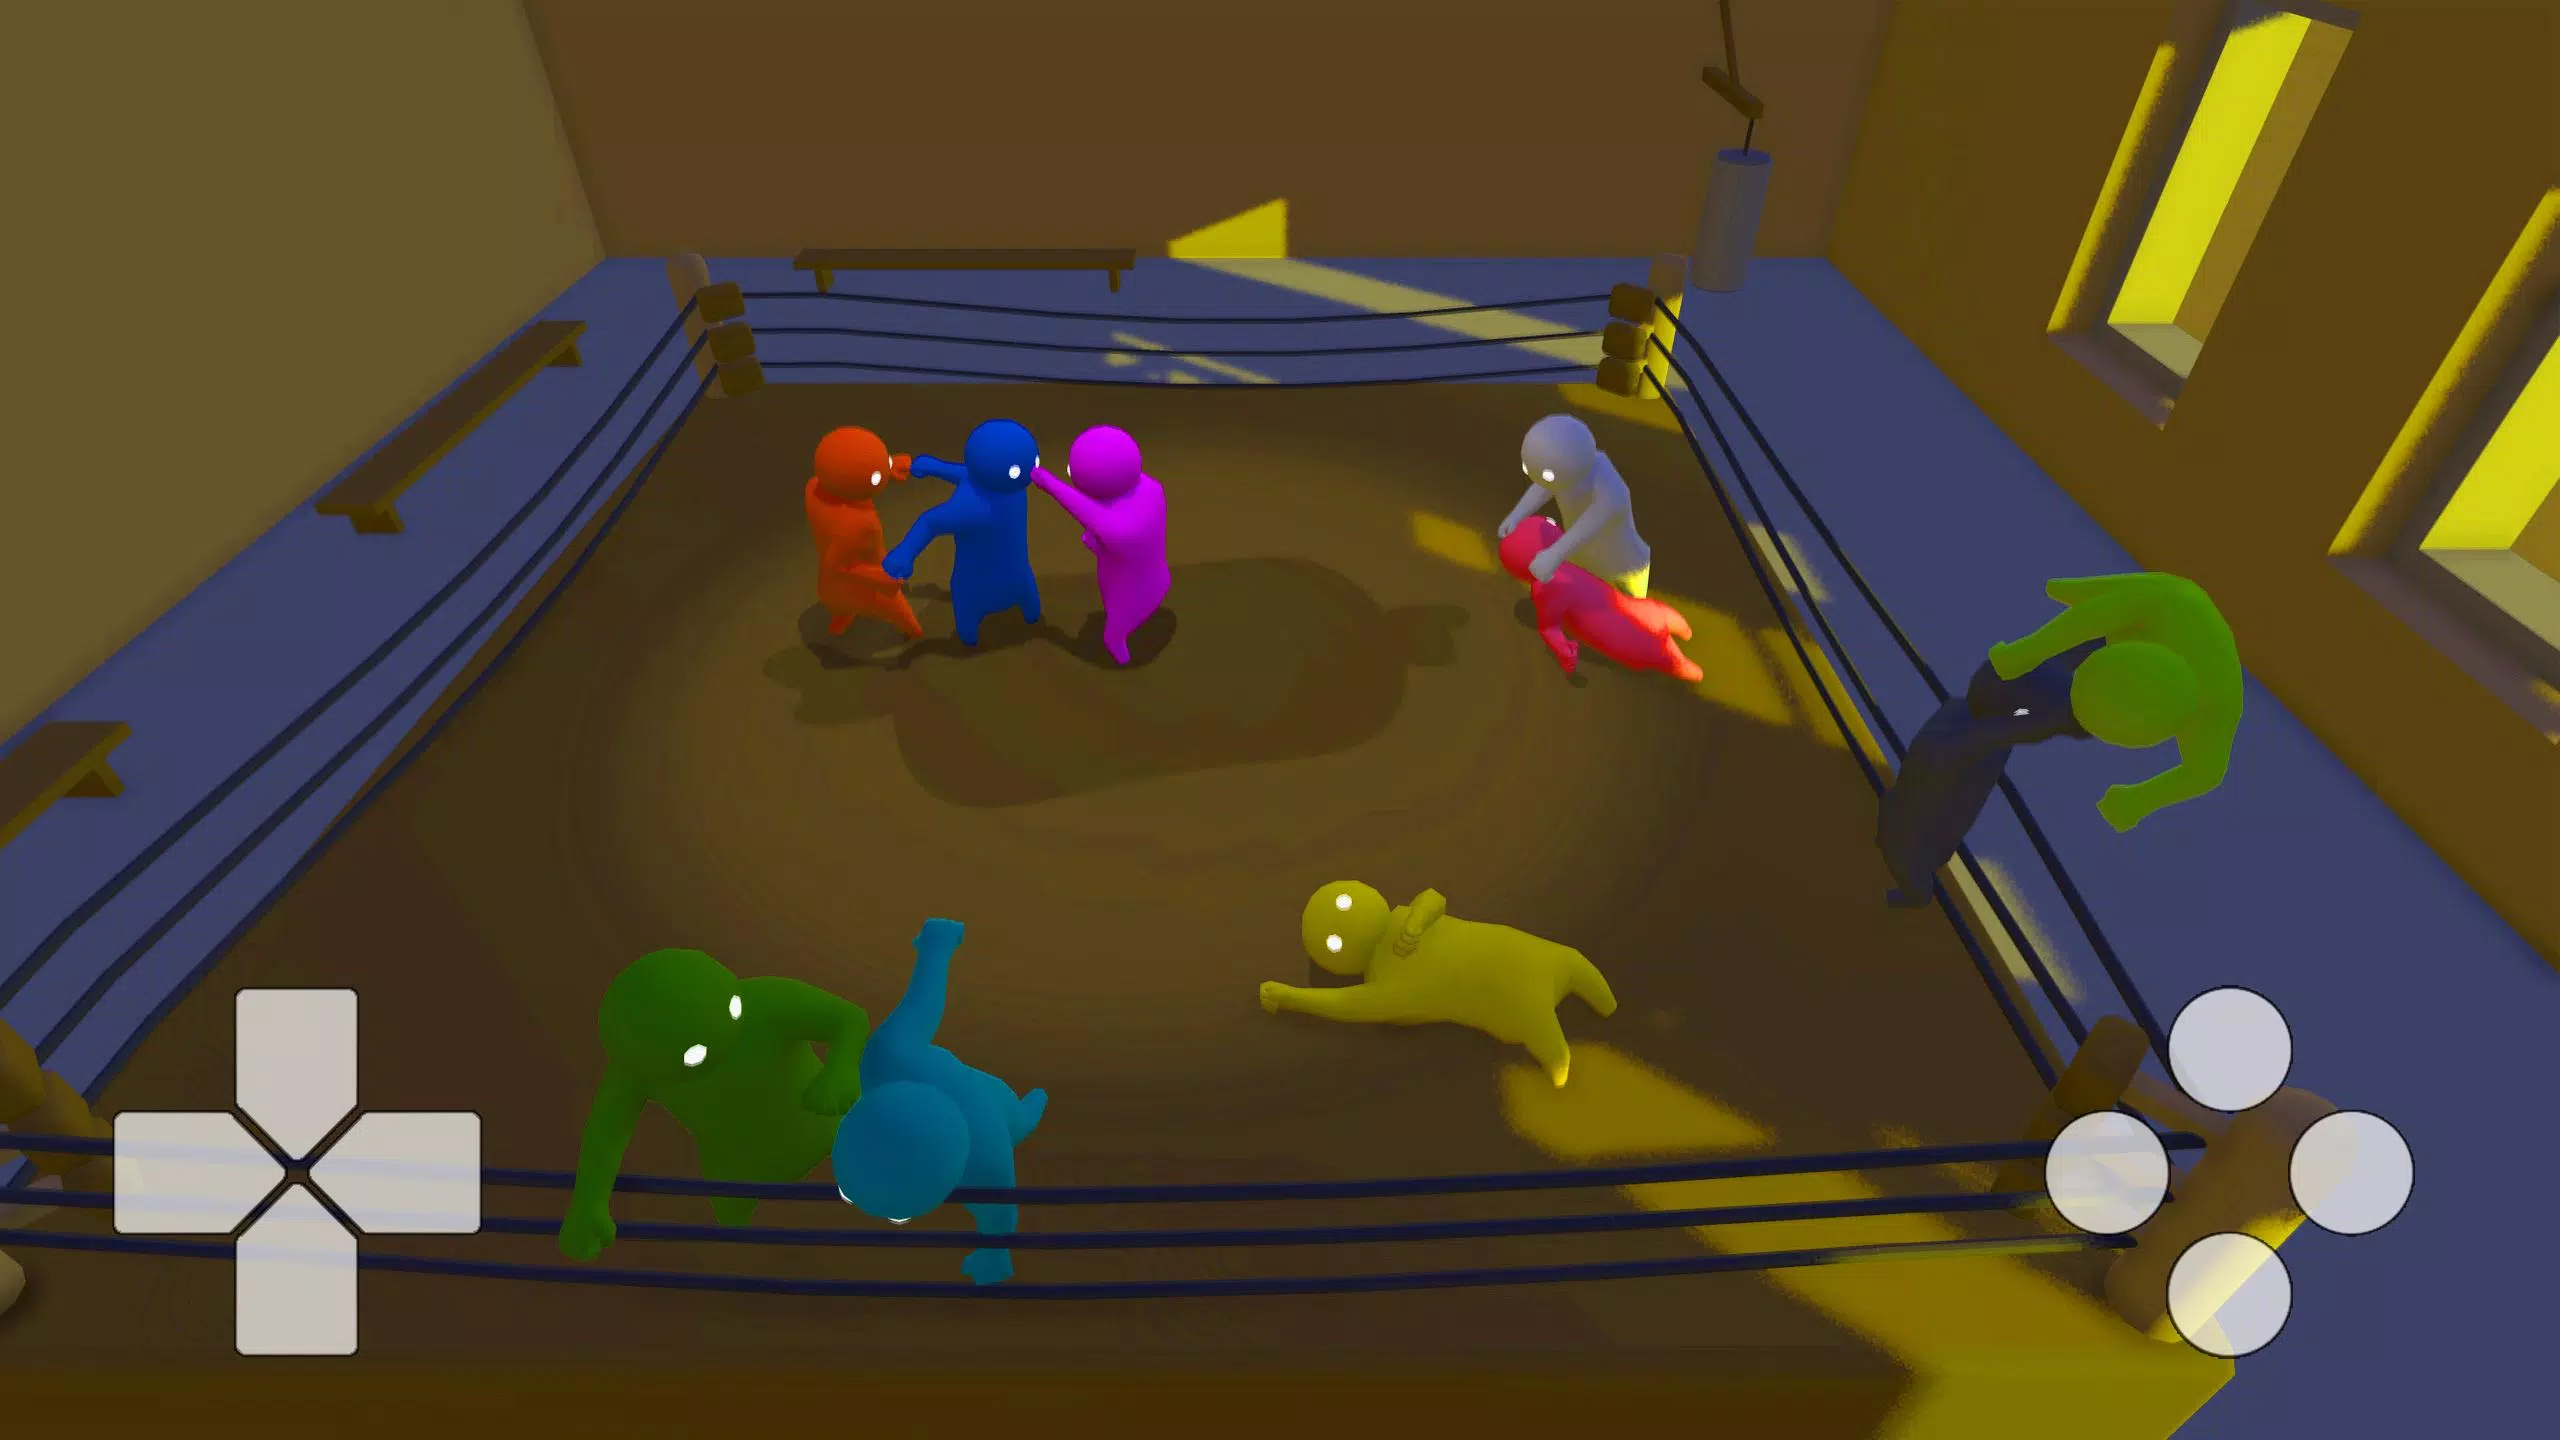 Gang Beasts Wallpaper 2021 HD 4K for Android - APK Download